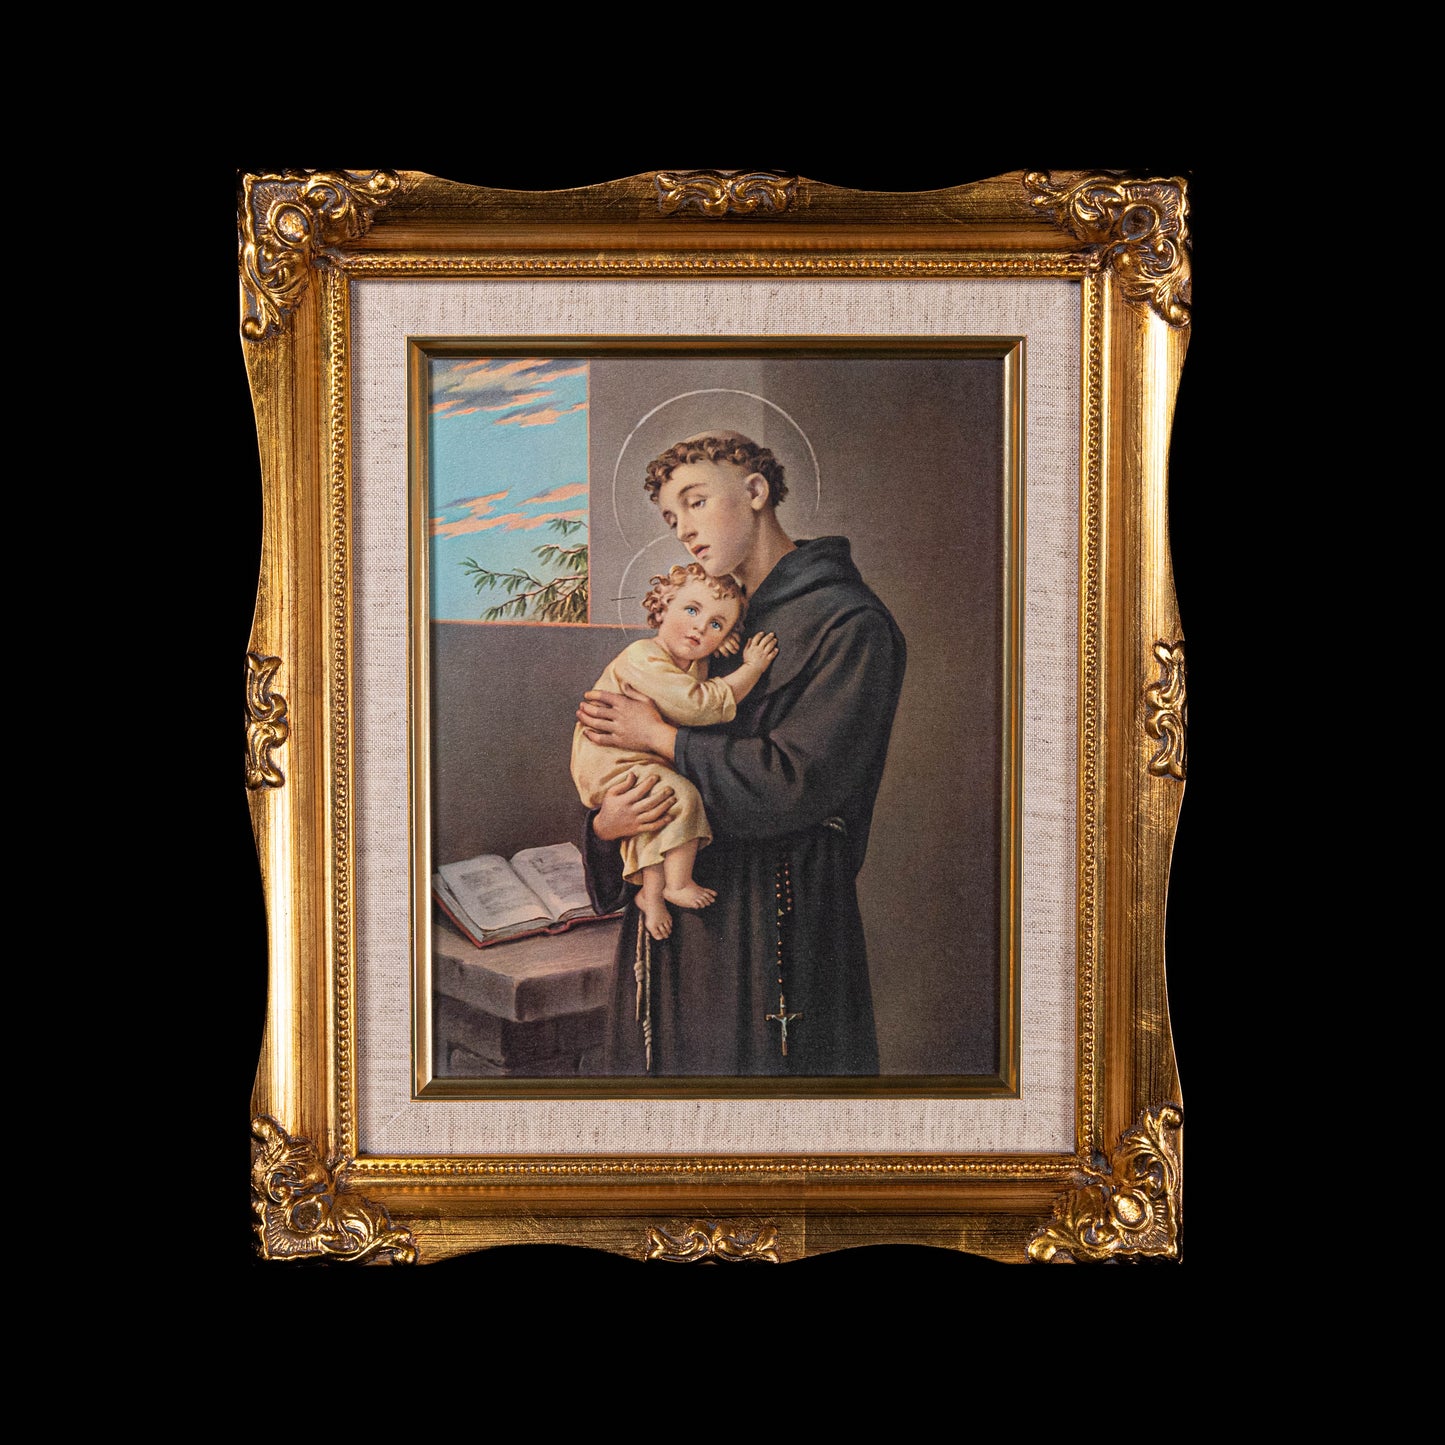 St. Anthony Textured Painting in Ornate Gold-Leaf Frame